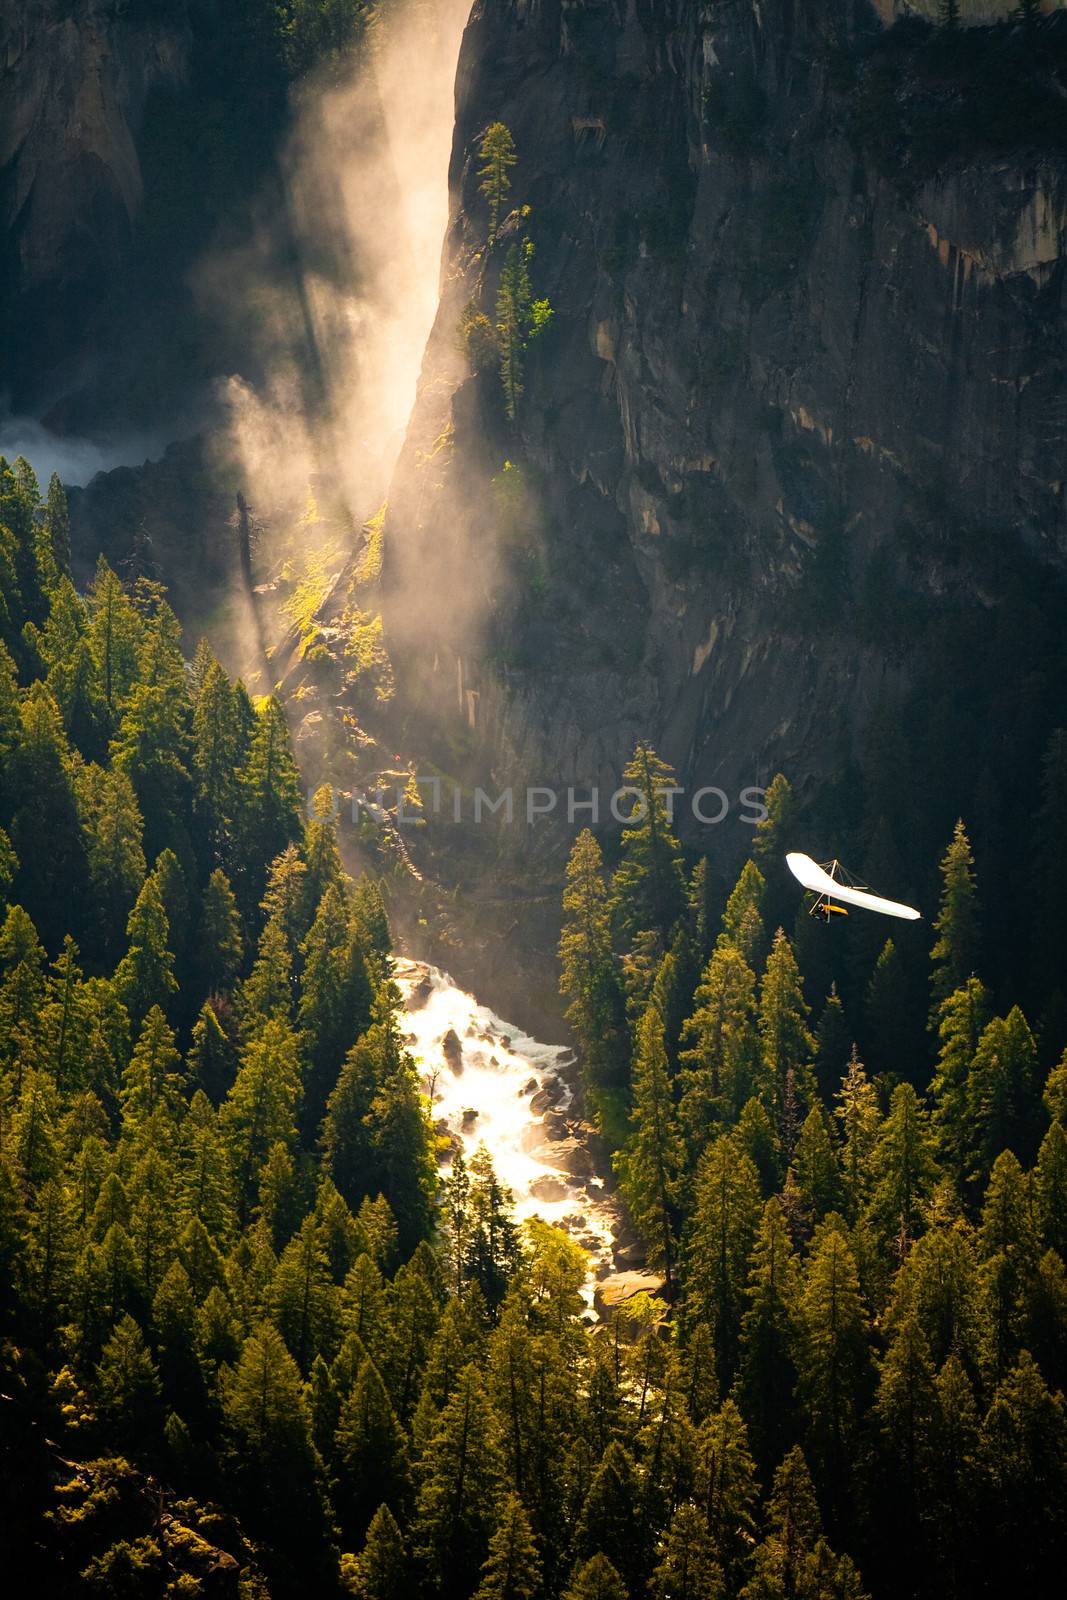 Aerial view of waterfall and river in green forest, Yosemite National Park, California, U.S.A.